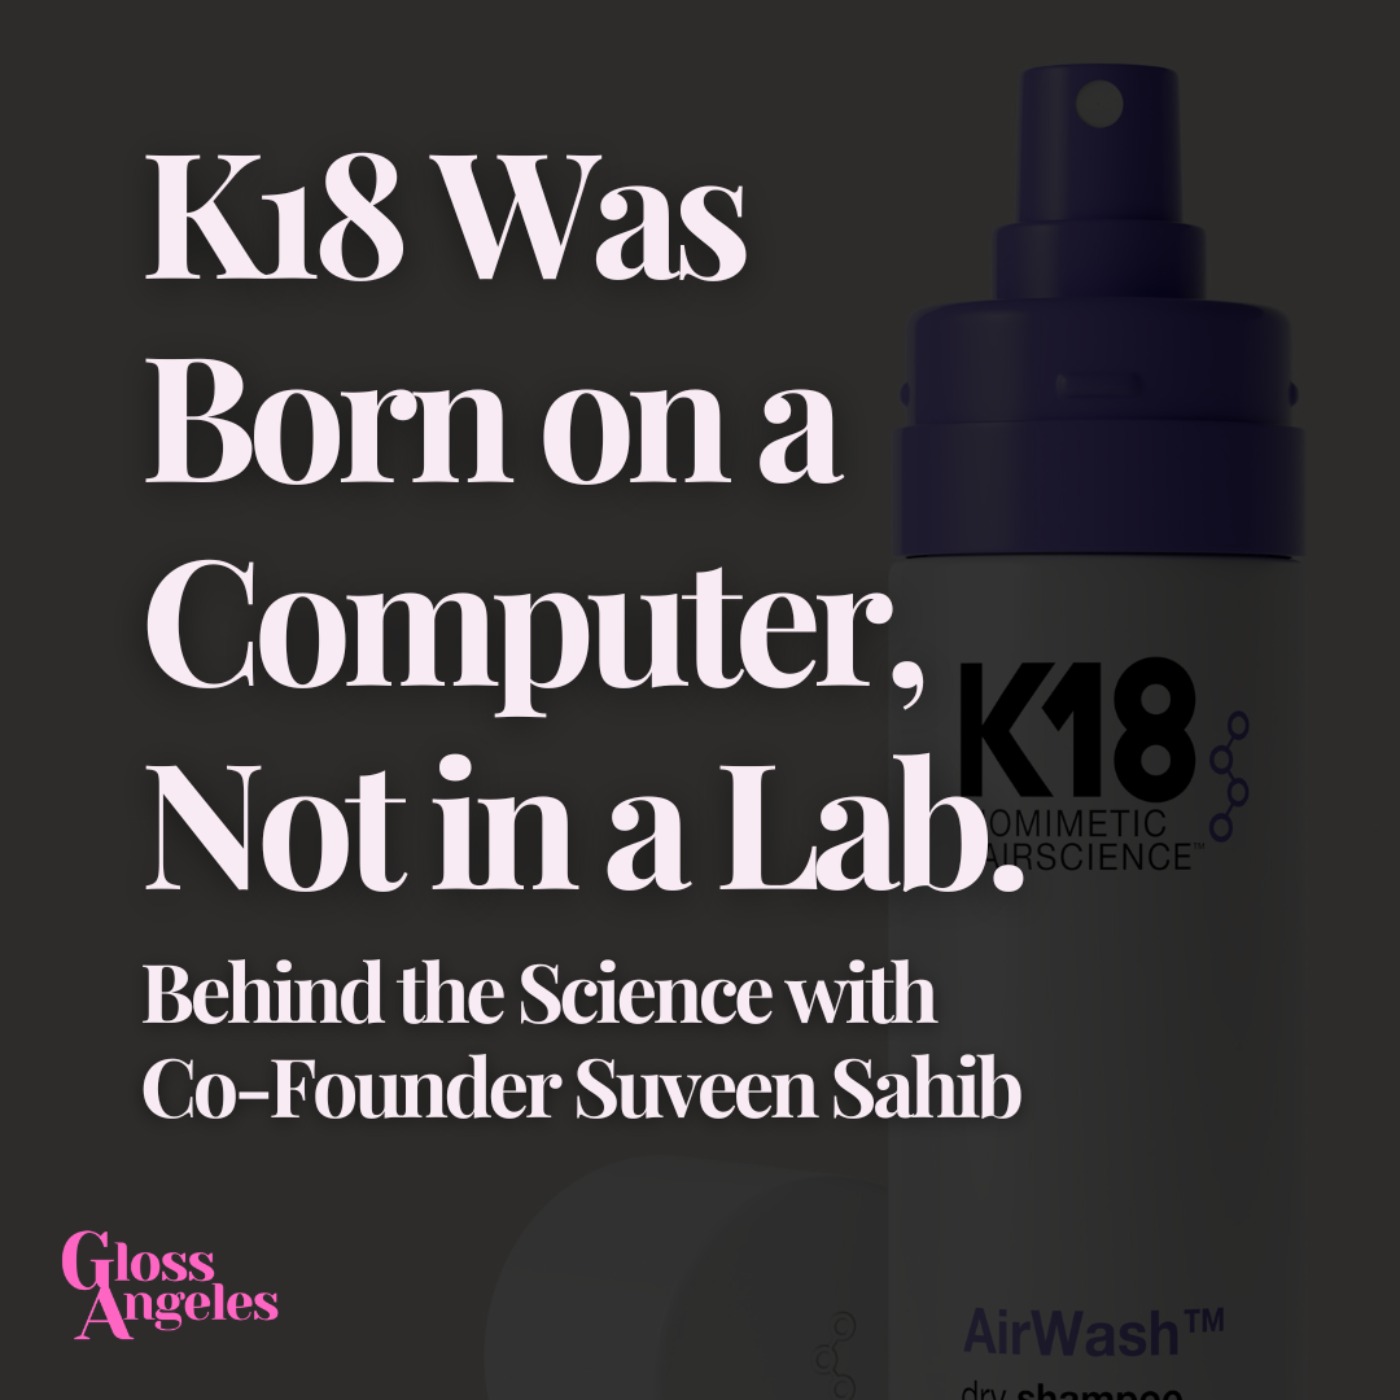 The K18 Biotech Effect: Innovation and Transformation With Co-Founder Suveen Sahib